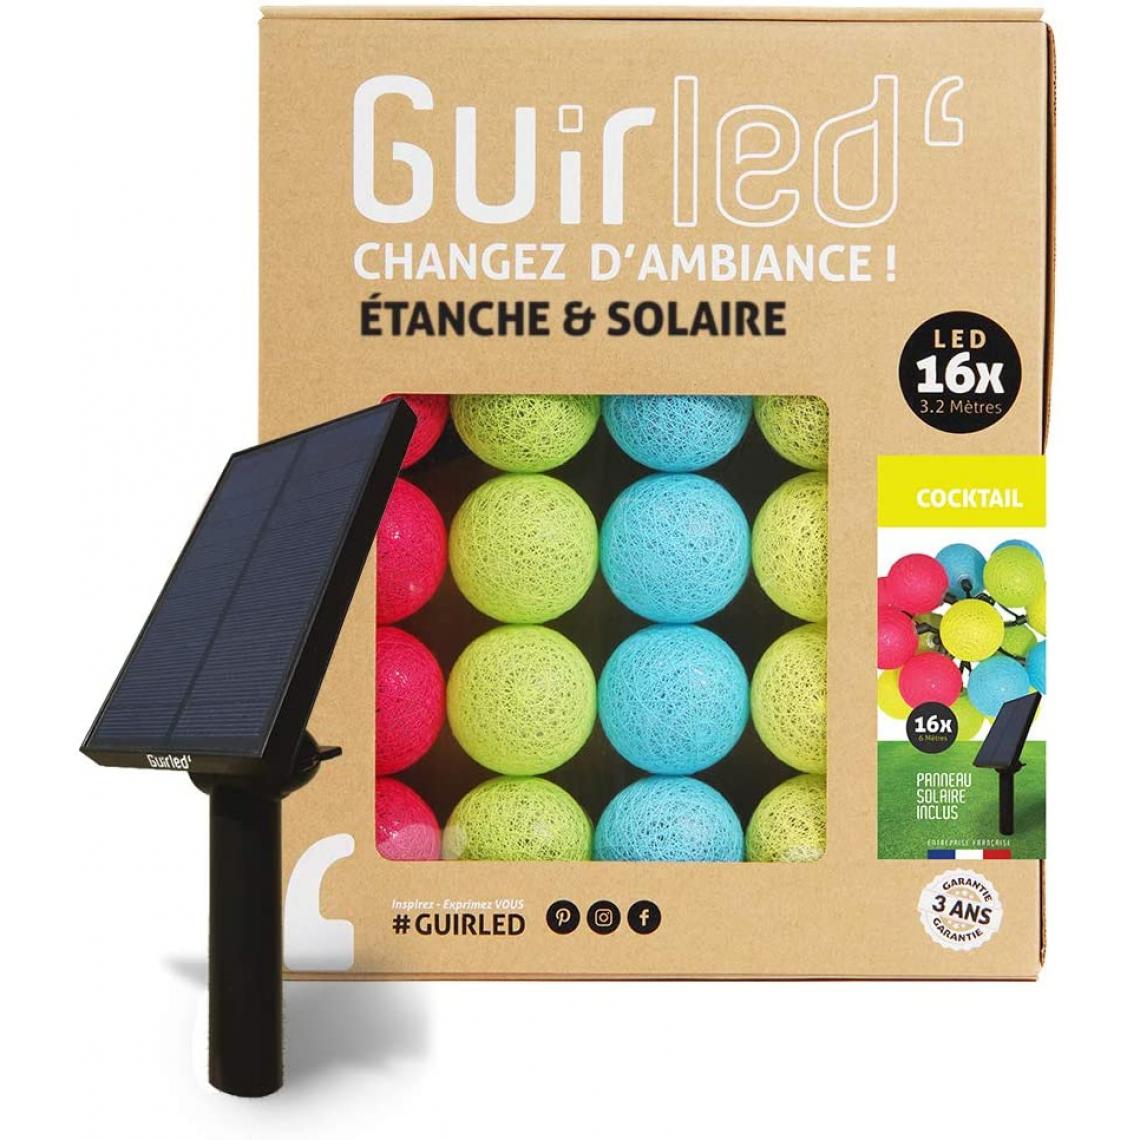 Guirled - Guirlande boule lumineuse 16 LED Outdoor - Cocktail - Eclairage solaire